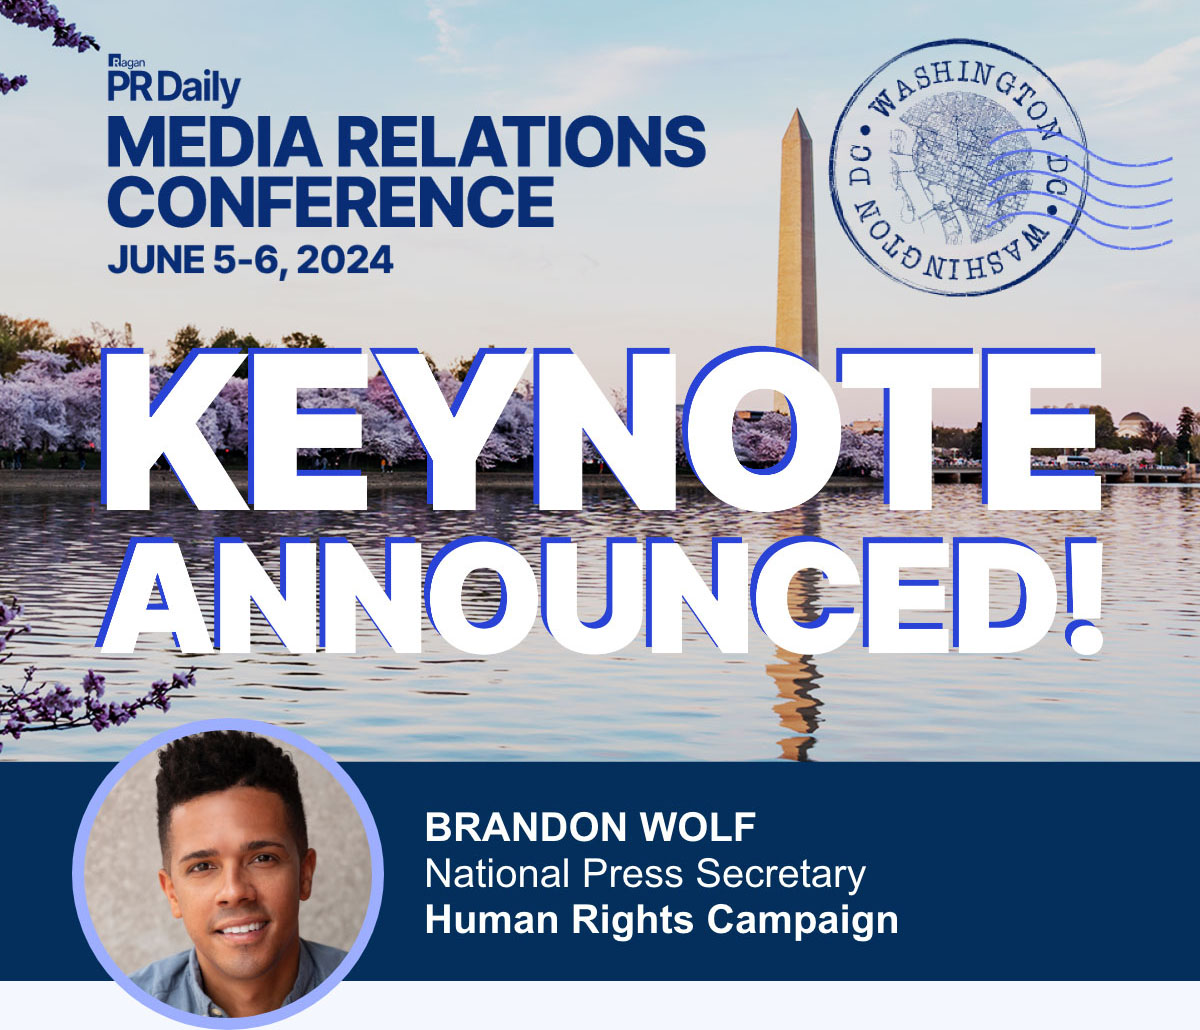 Media Relations Conference | June 5-6, 2024 | Washington D.C. | Keynote Announced | Brandon Wolf | Human Rights Campaign